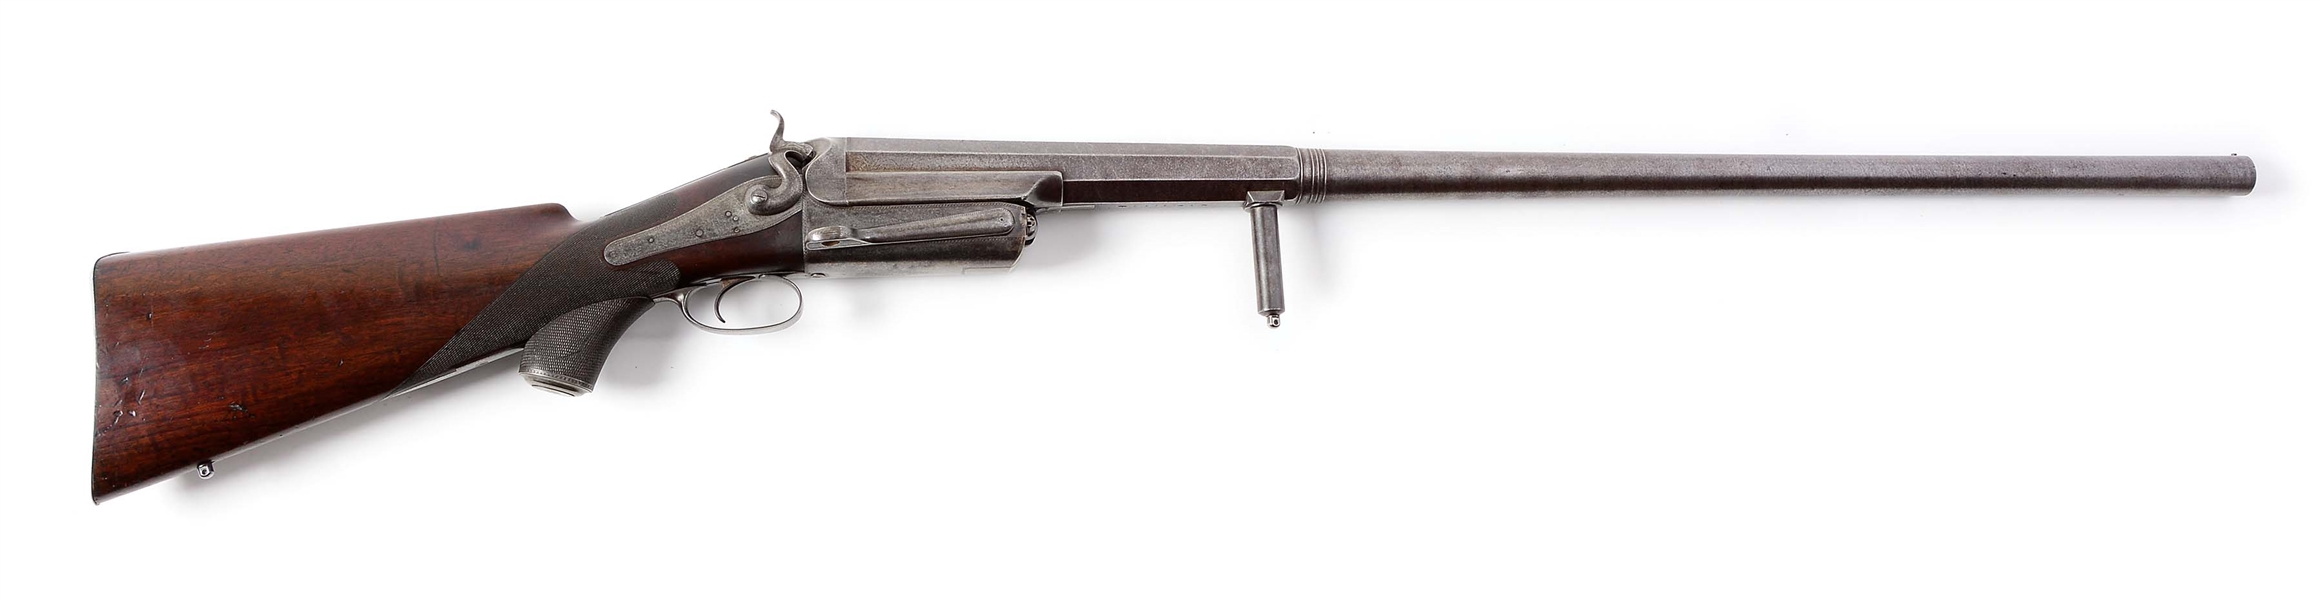 (A) MASSIVE 4 BORE WATERFOWLING PUNT GUN BY J.D. DOUGALL  OF EDINBURGH AND LONDON.